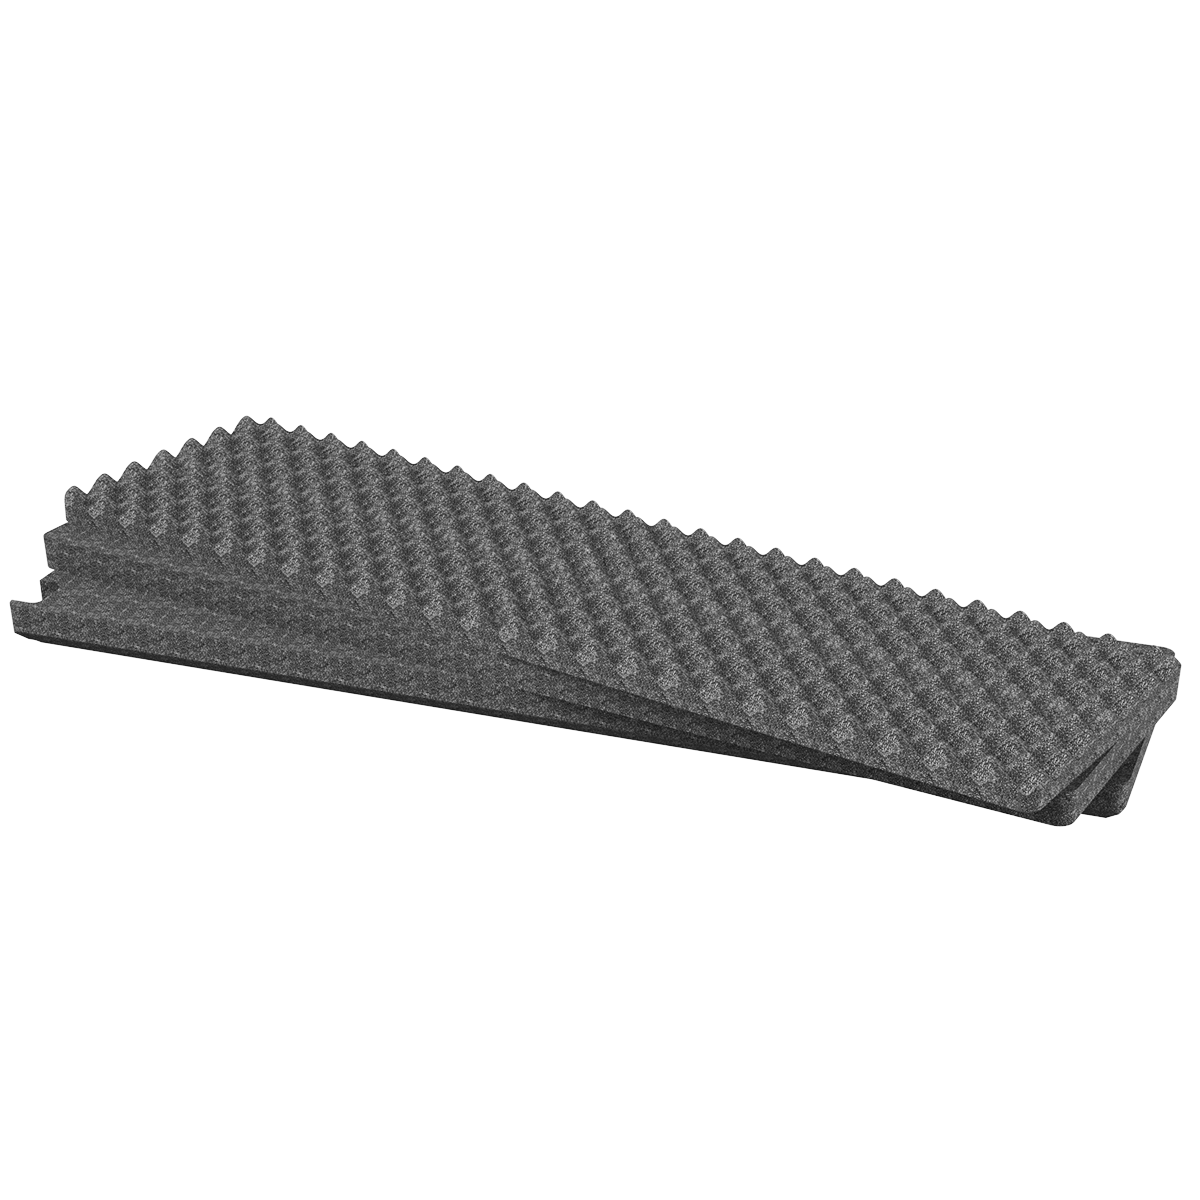 Stack of 3 layers of flexible foam, replacement foam for 1750 Pelican style case